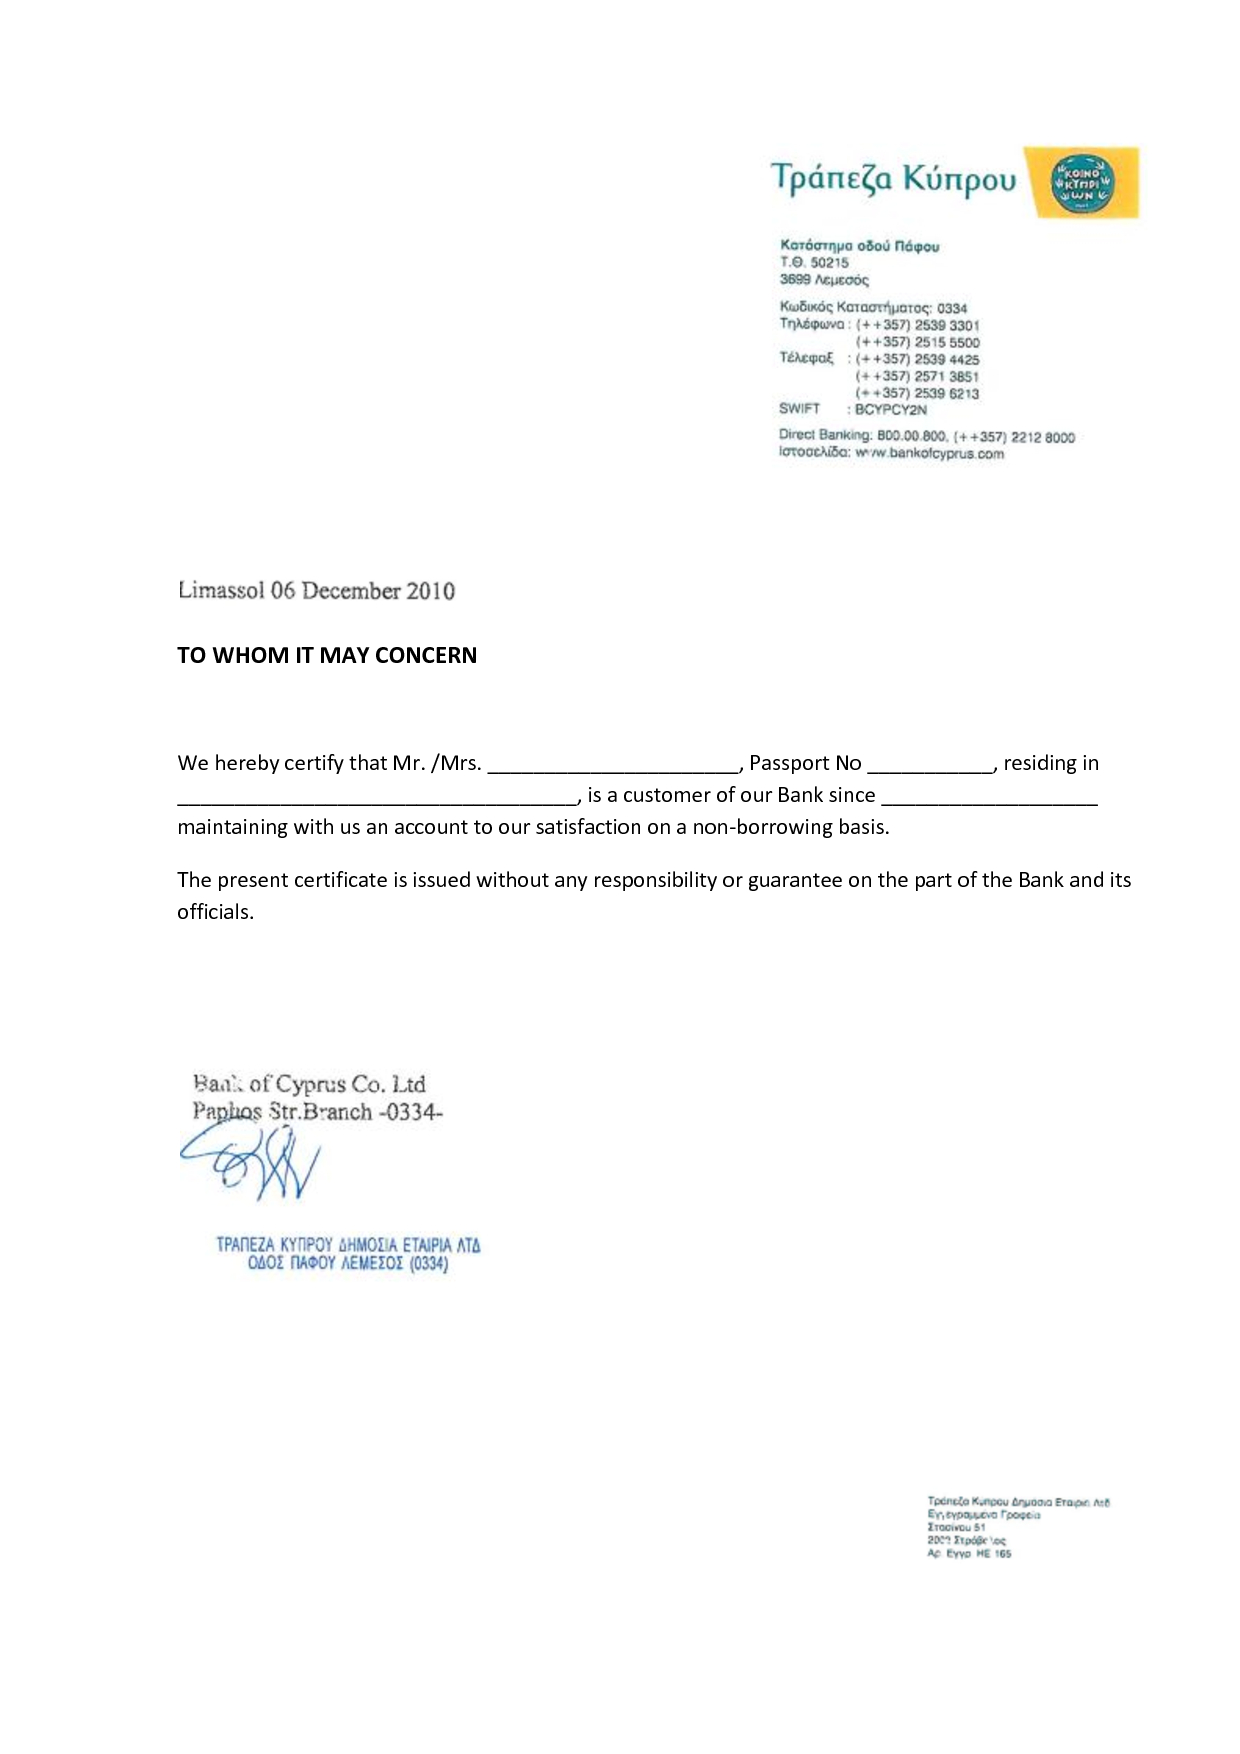 Recommendation Letter Format For Bank Account Opening with regard to dimensions 1240 X 1754